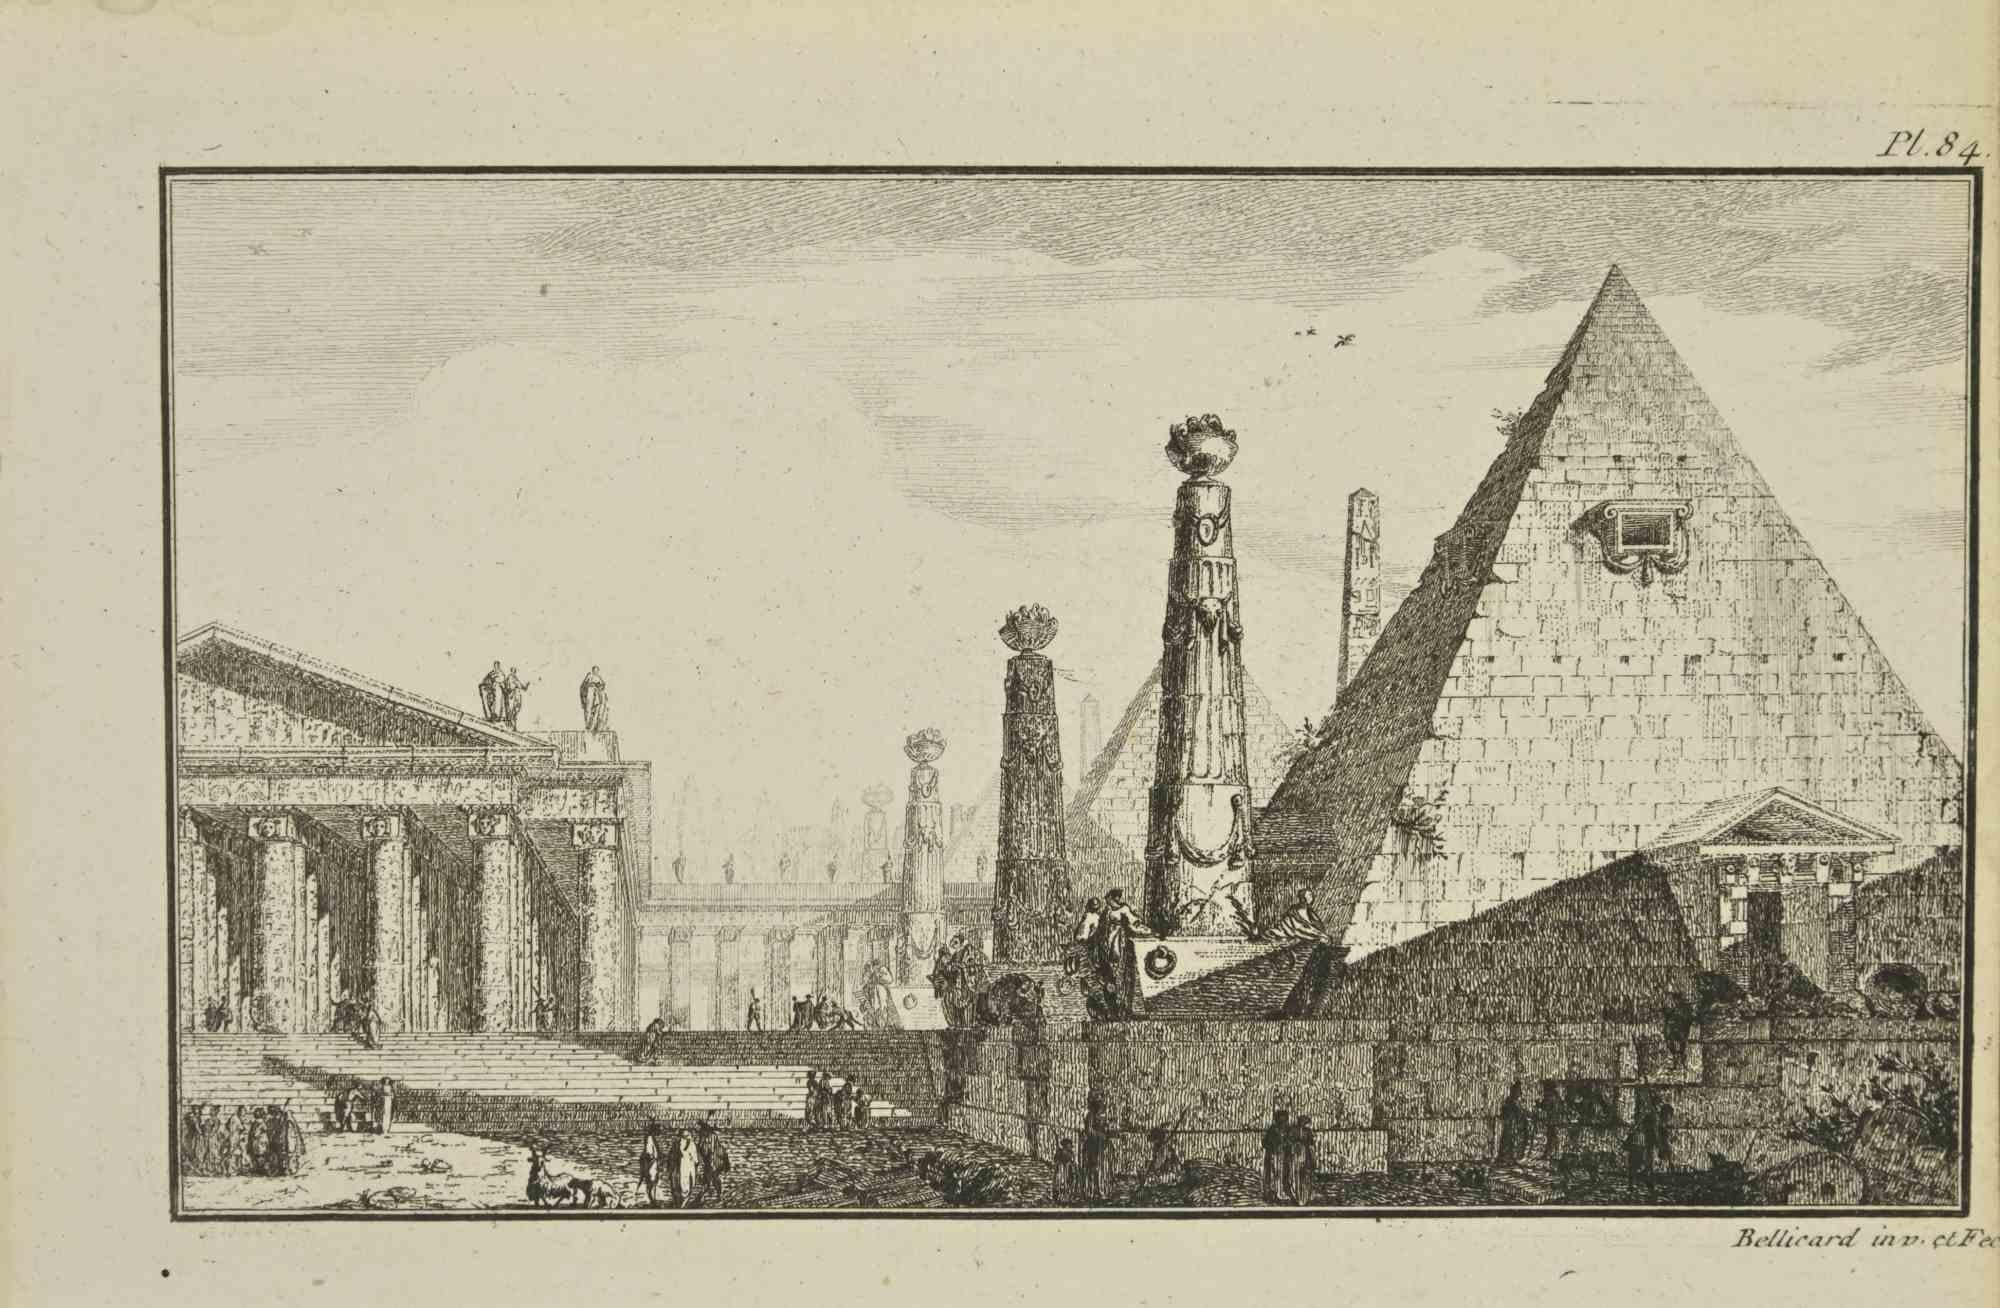 Pyramid is an etching realized by Jérôme Charles Bellicard in the 18th Century.

Signed on the plate.

Good conditions.

The artwork is depicted through confident strokes.